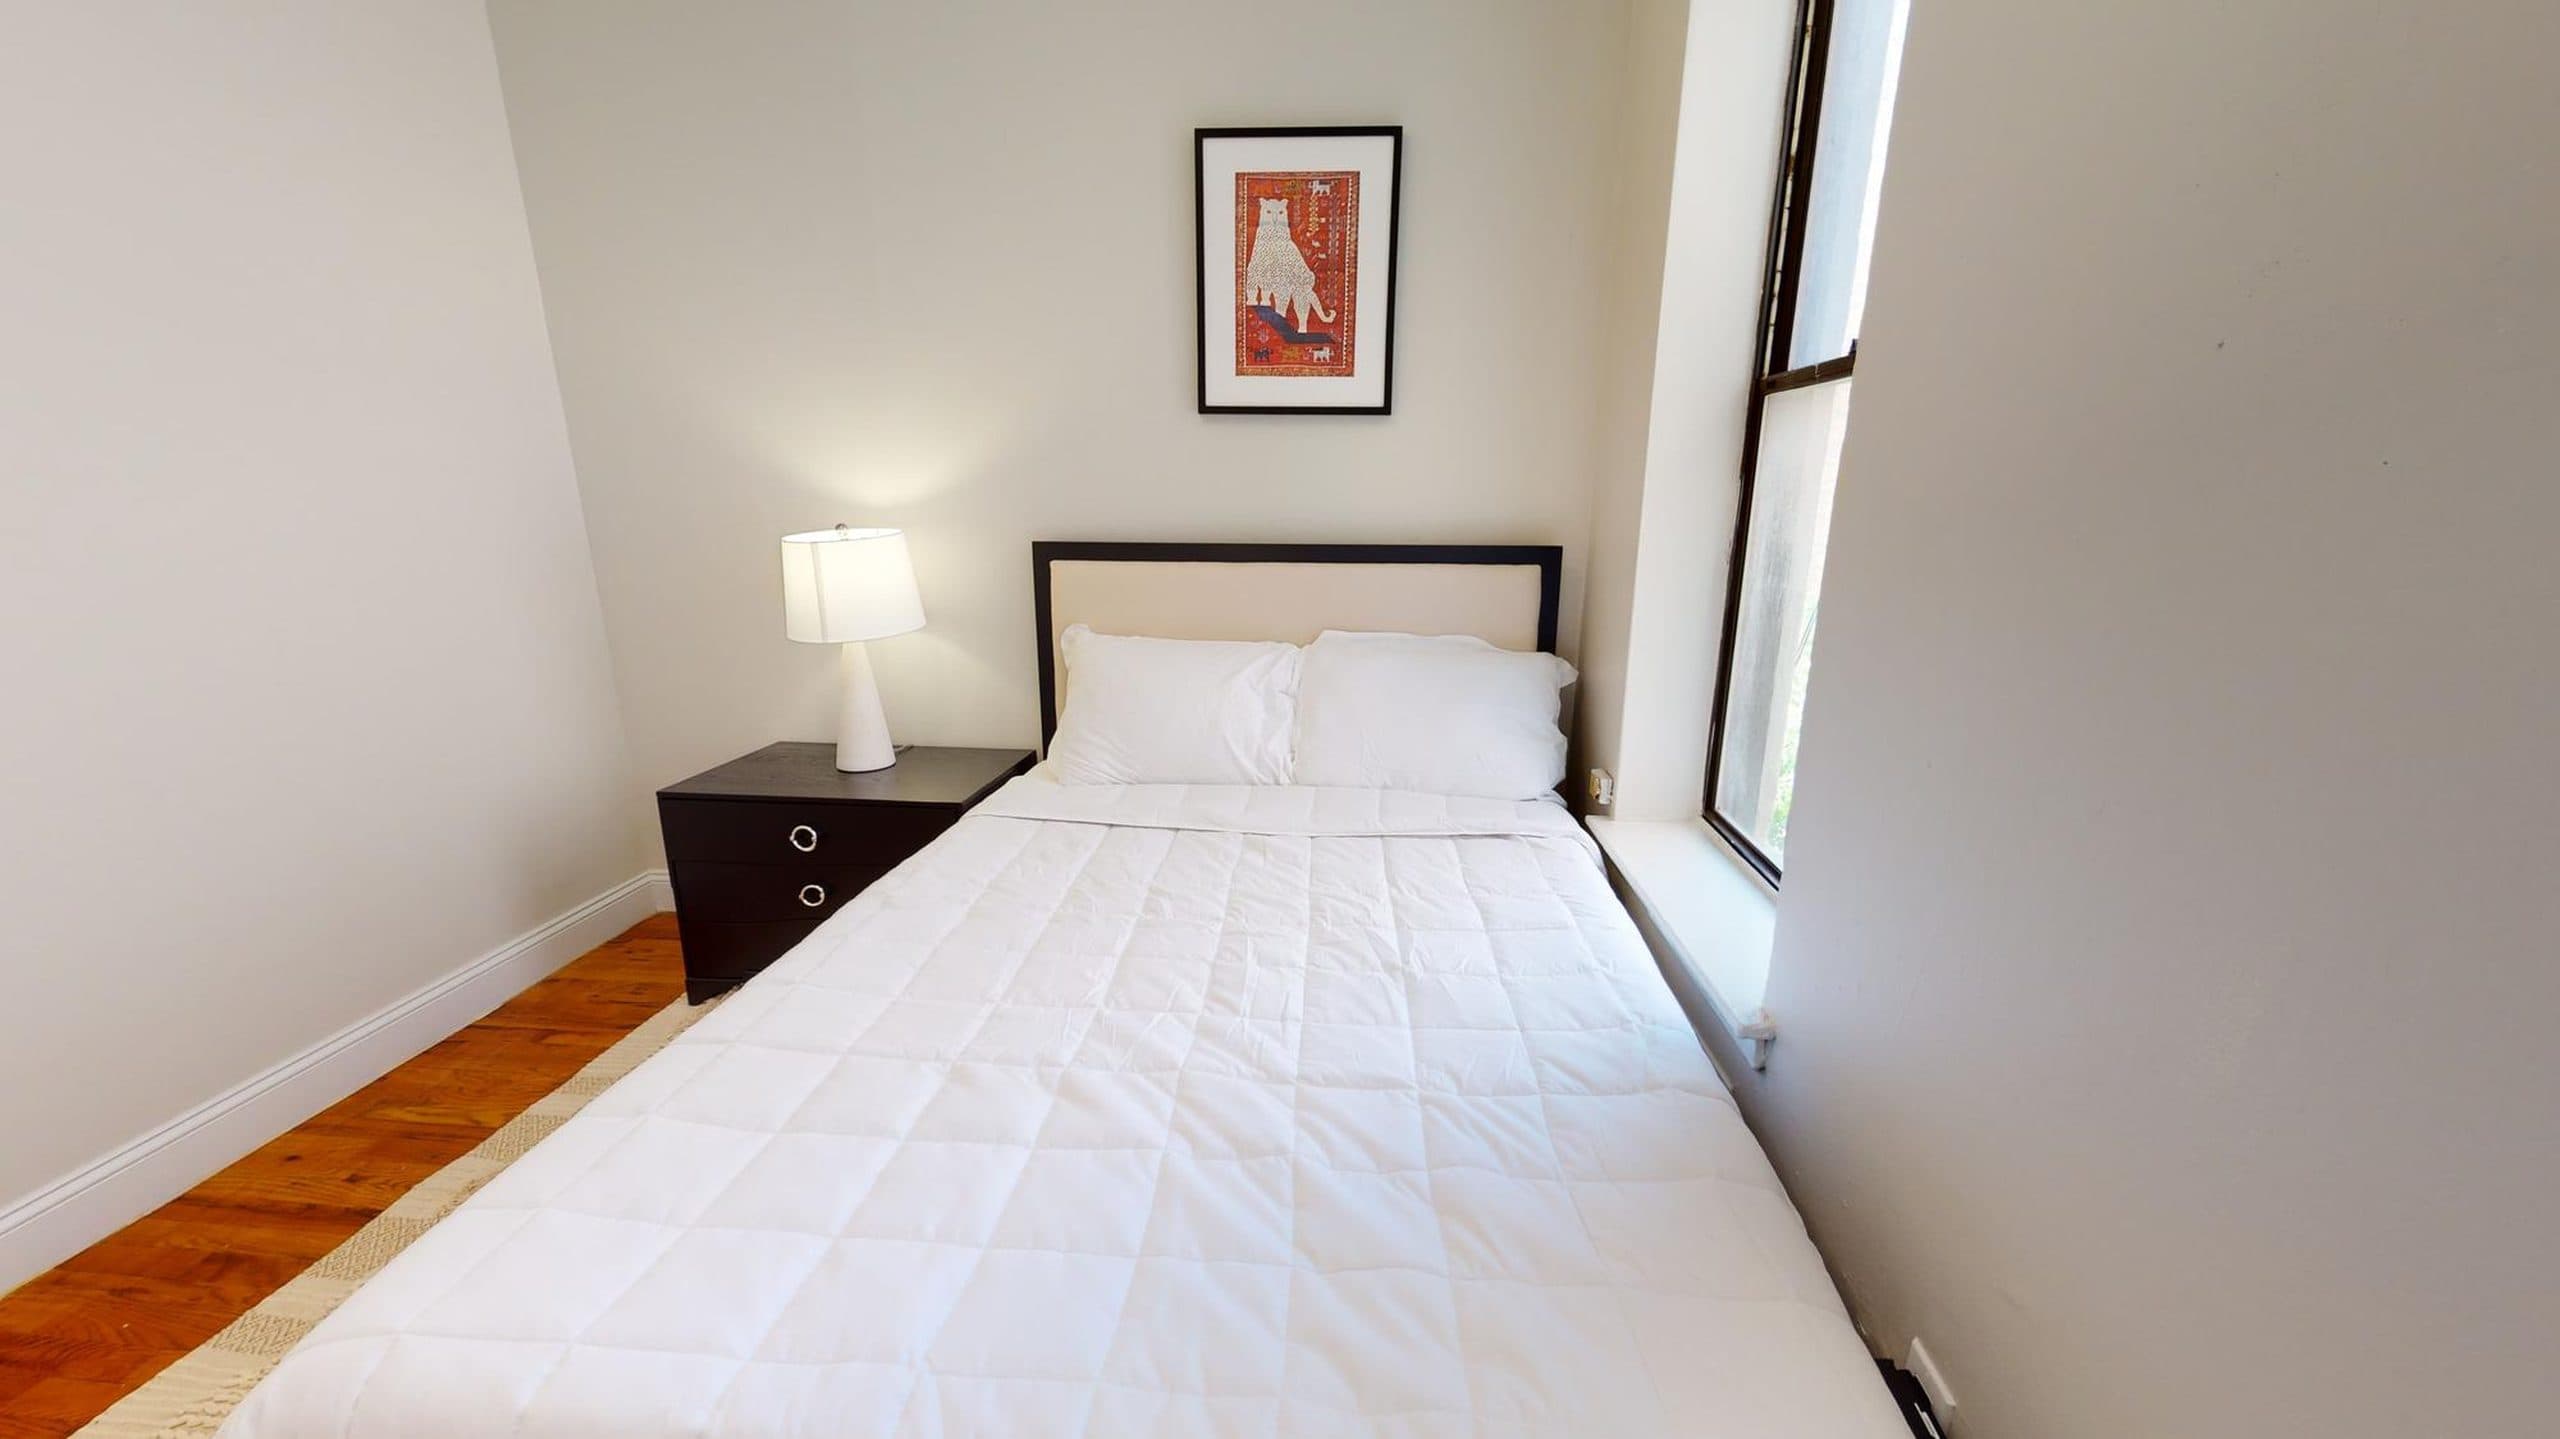 Photo 6 of #3610: Queen Bedroom A at June Homes